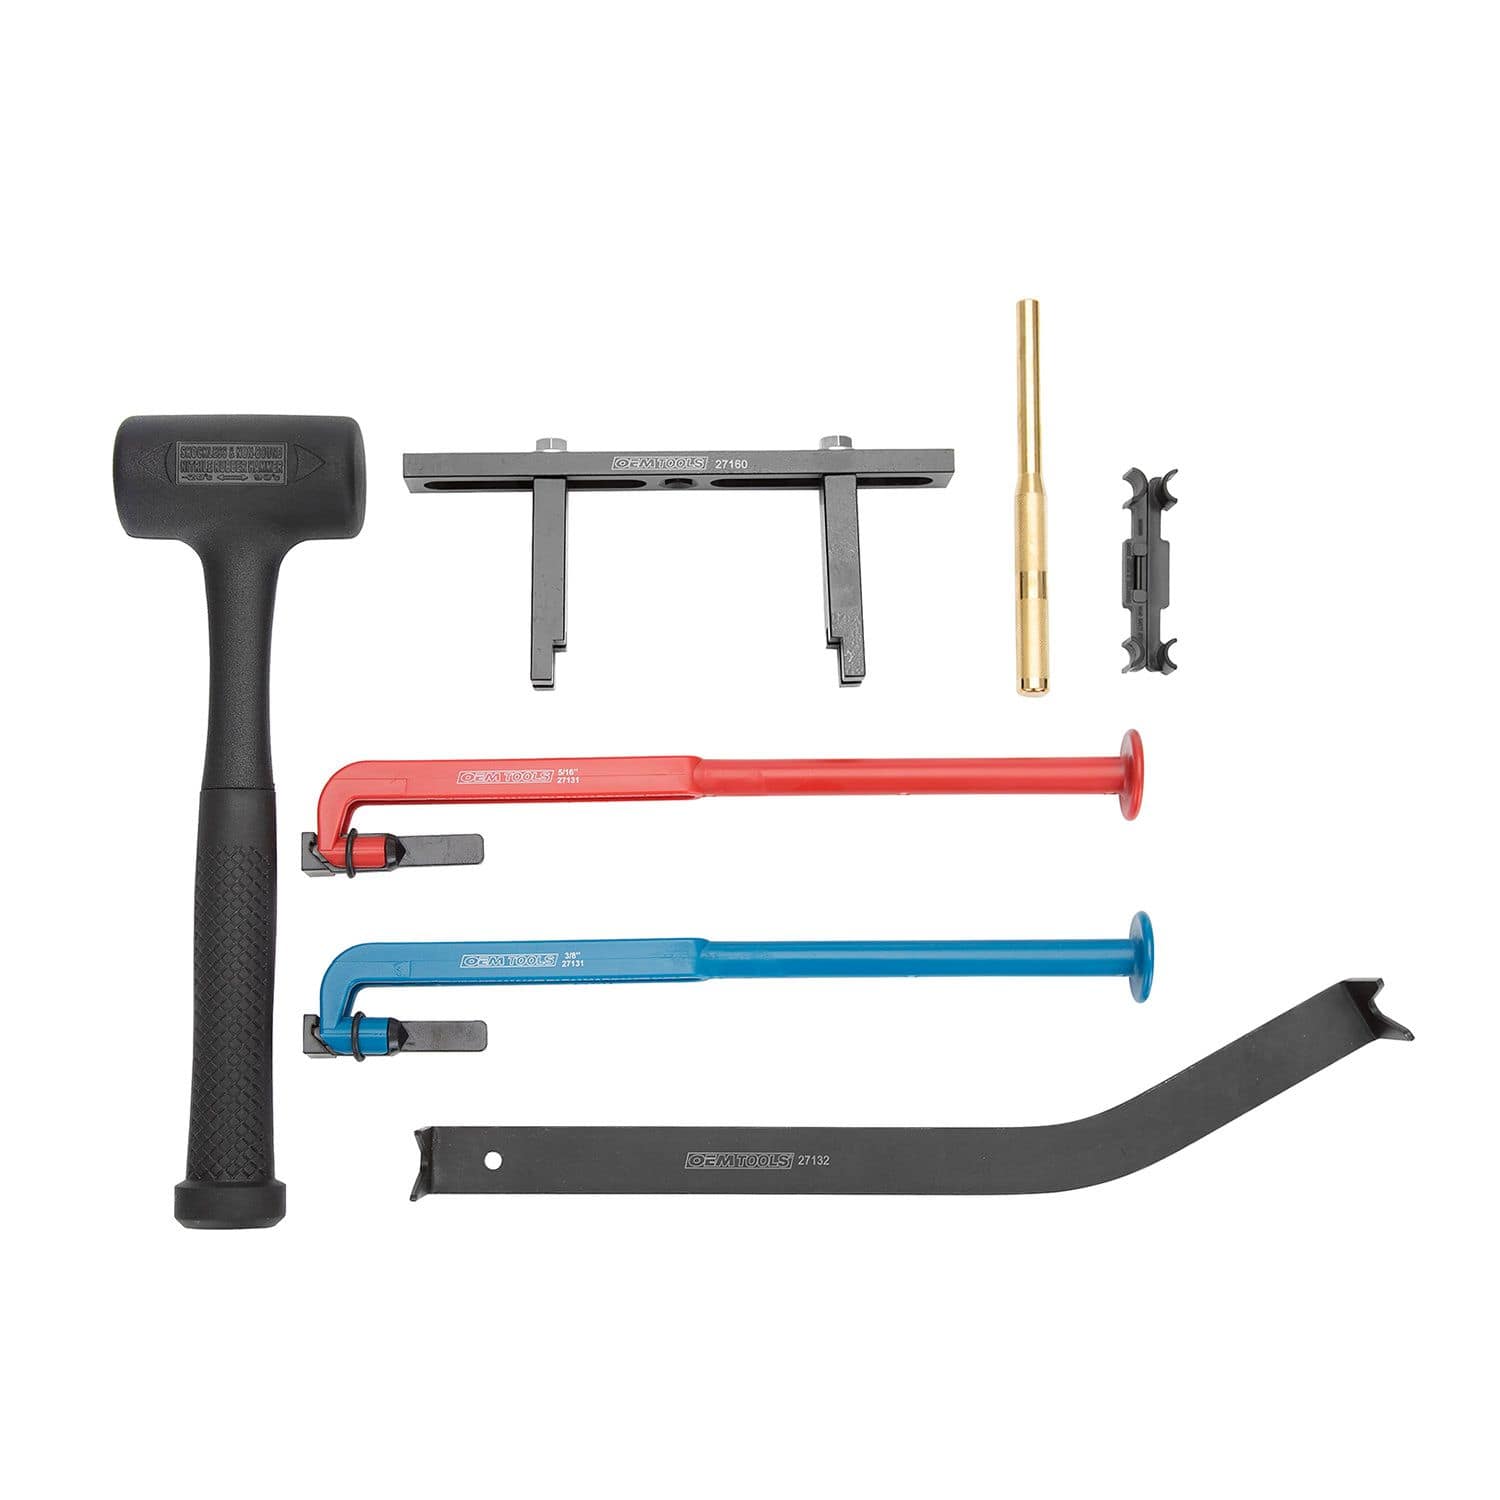 Dodge Fuel Pump Tools  Wrenches, Pliers —